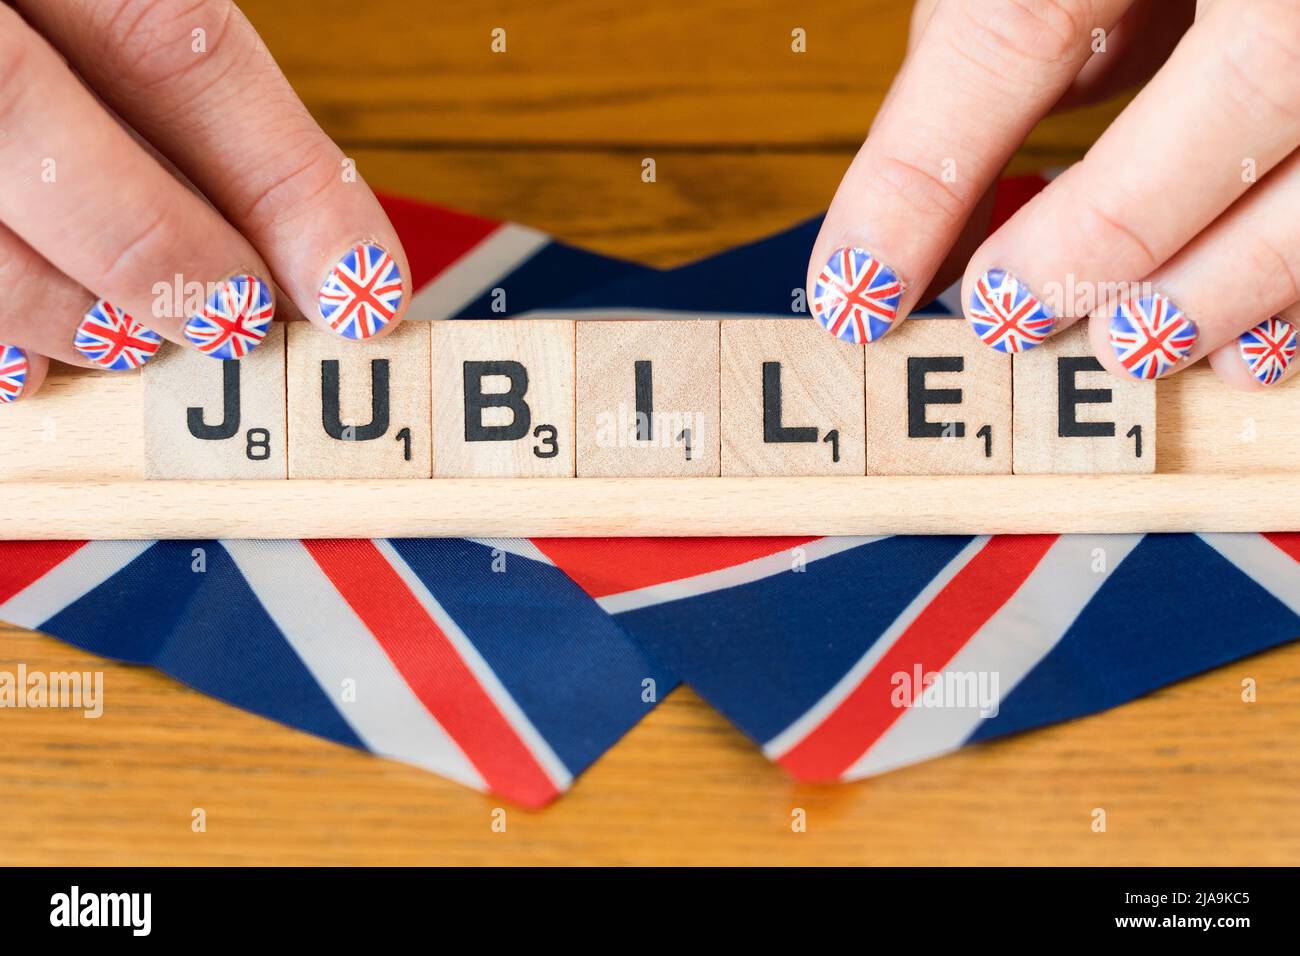 Woman's fingers with fingernails painted with the British flag holding scrabble letters that spell out Jubilee - Queen's Platinum jubilee June 2022 Stock Photo